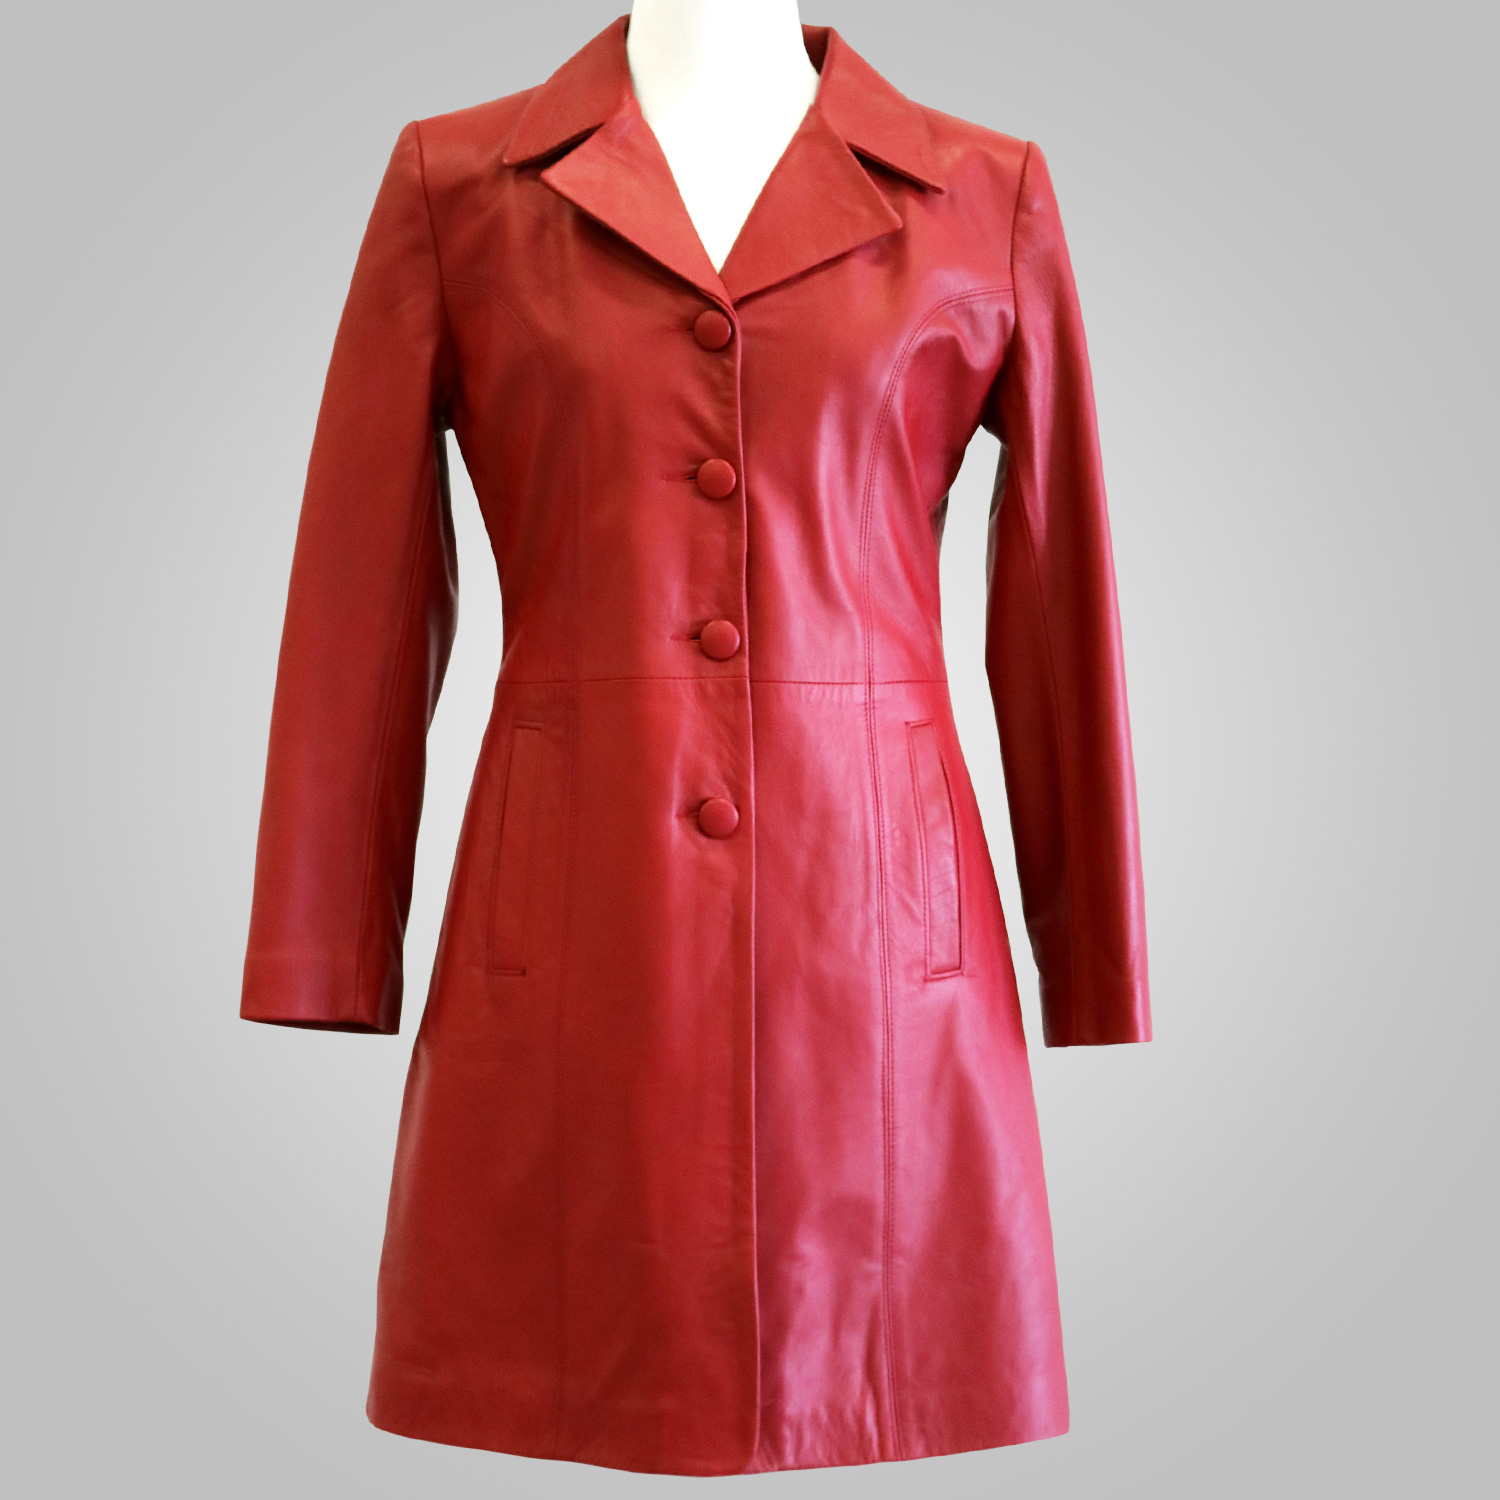 Red Leather Jacket - Red Tina 009 - L'Aurore Leather Jacket